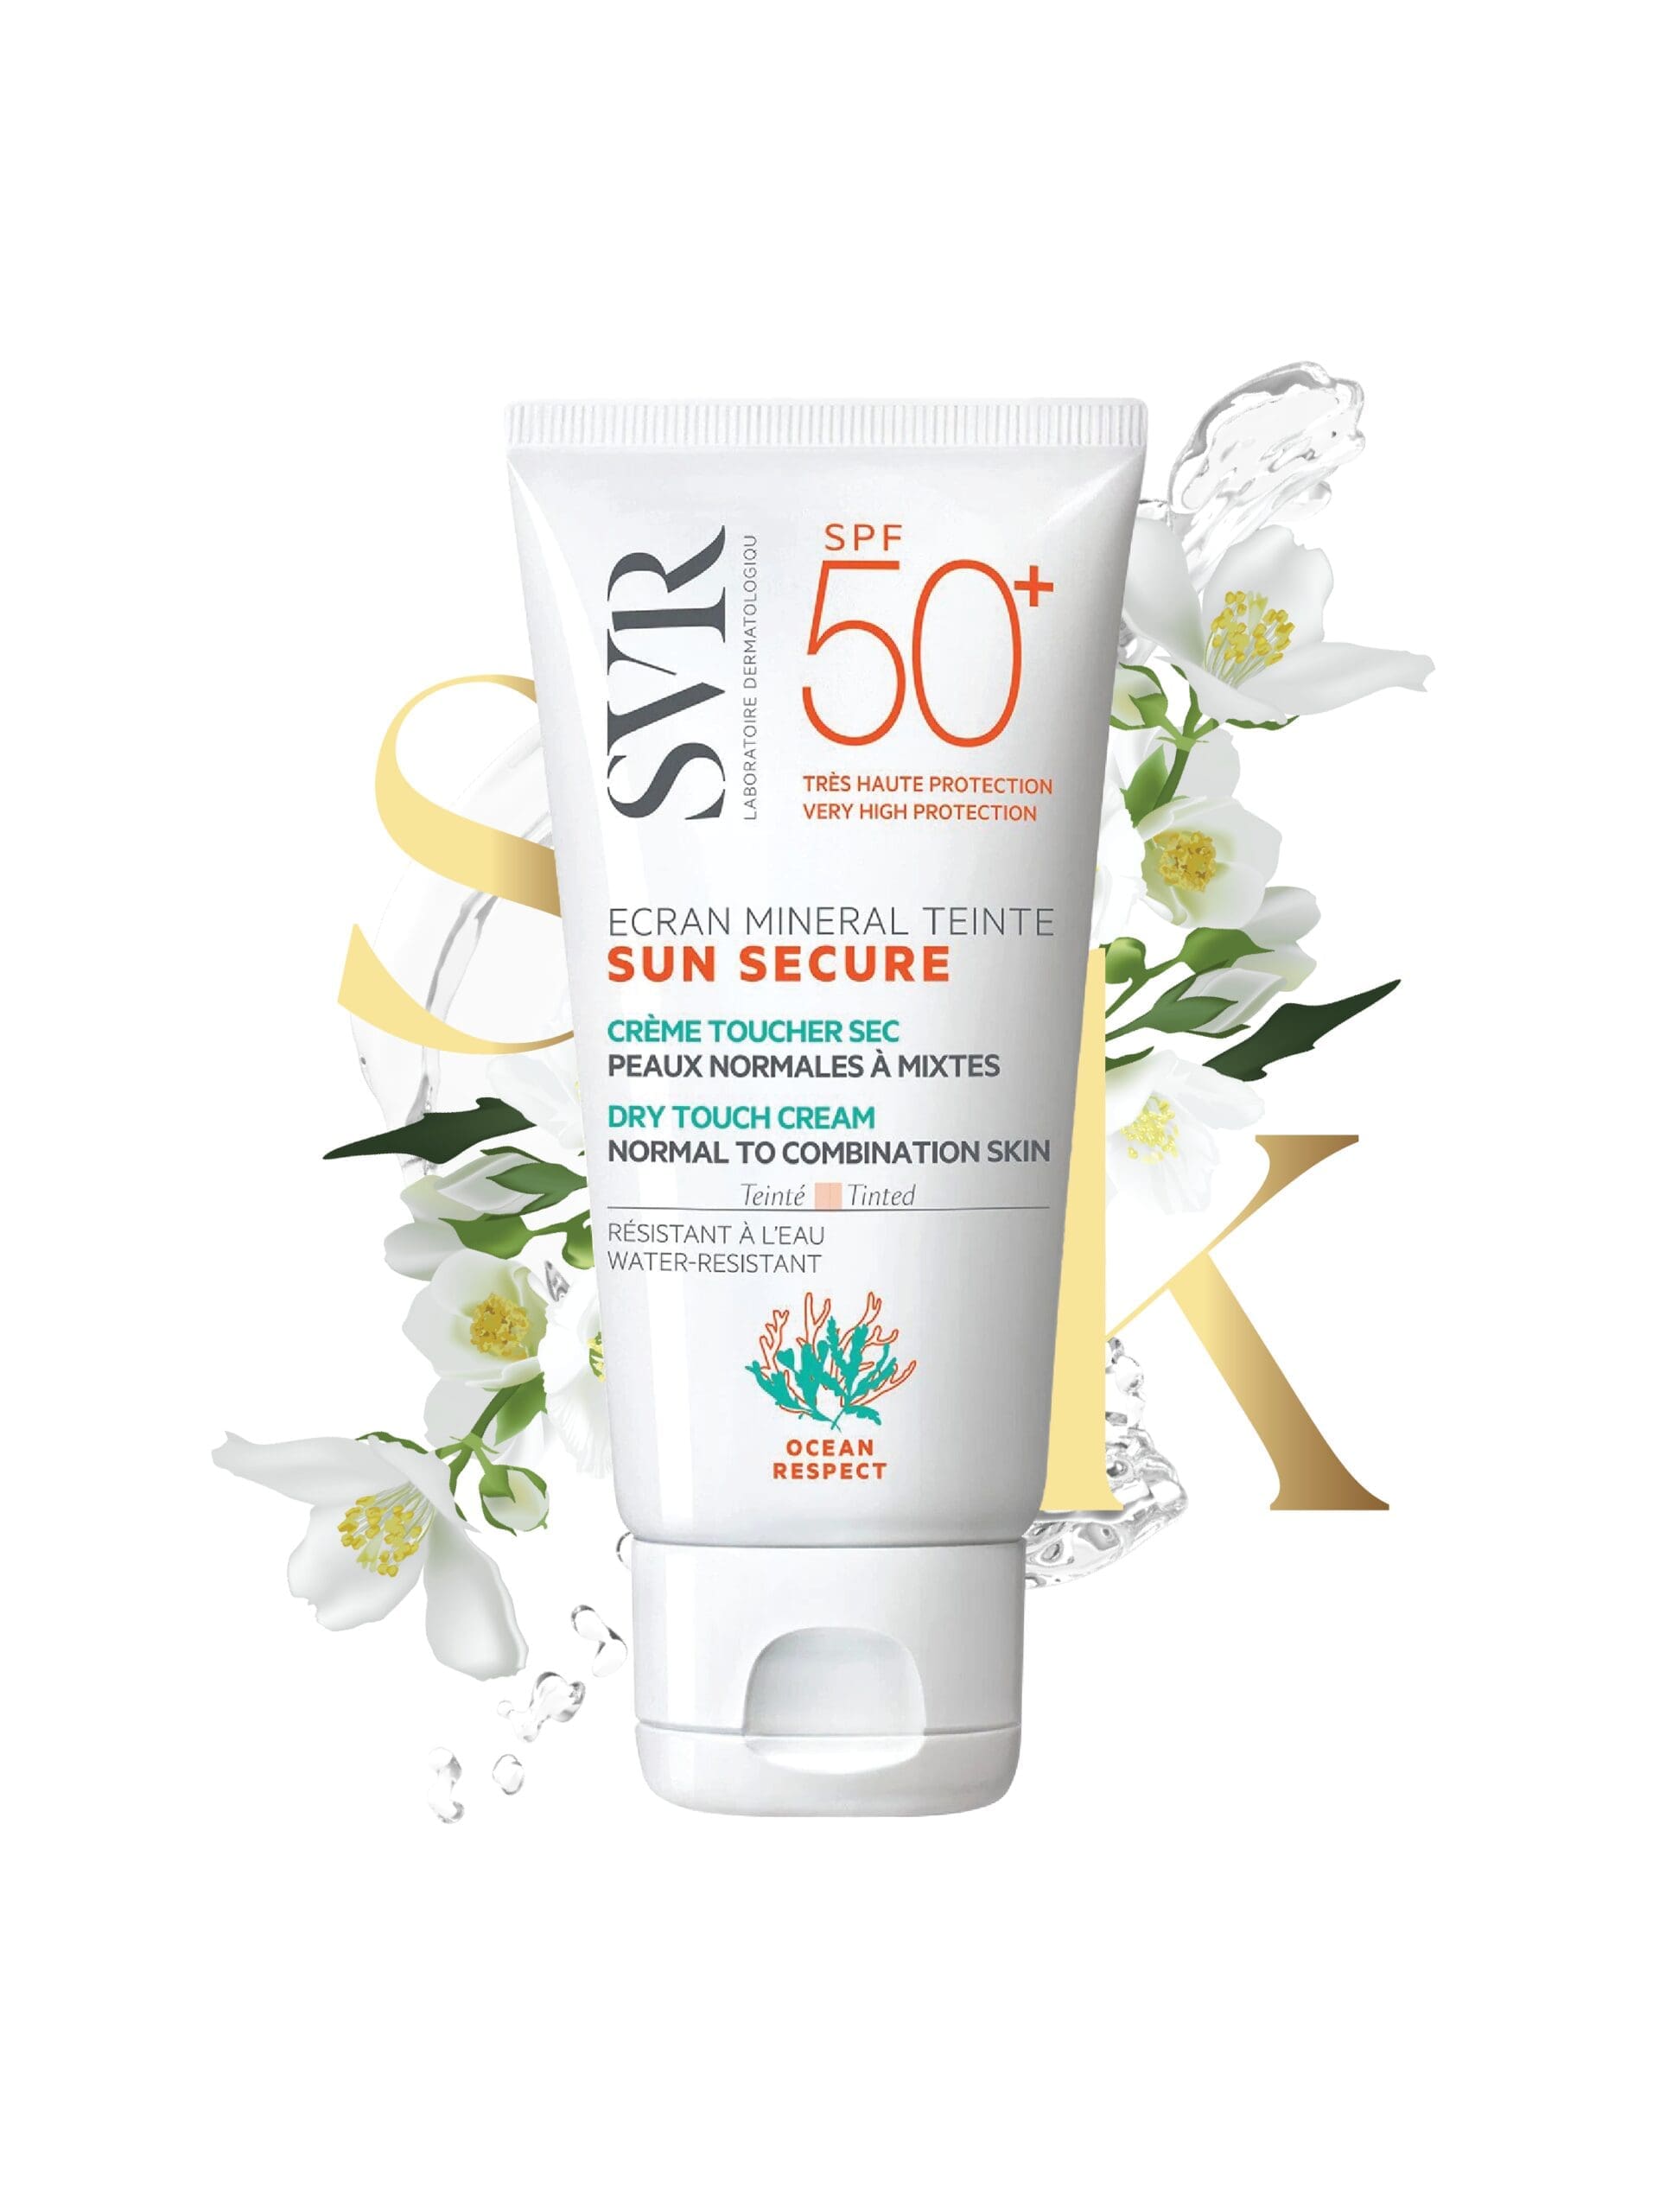 tinted-mineral-sunscreen-svr-spf